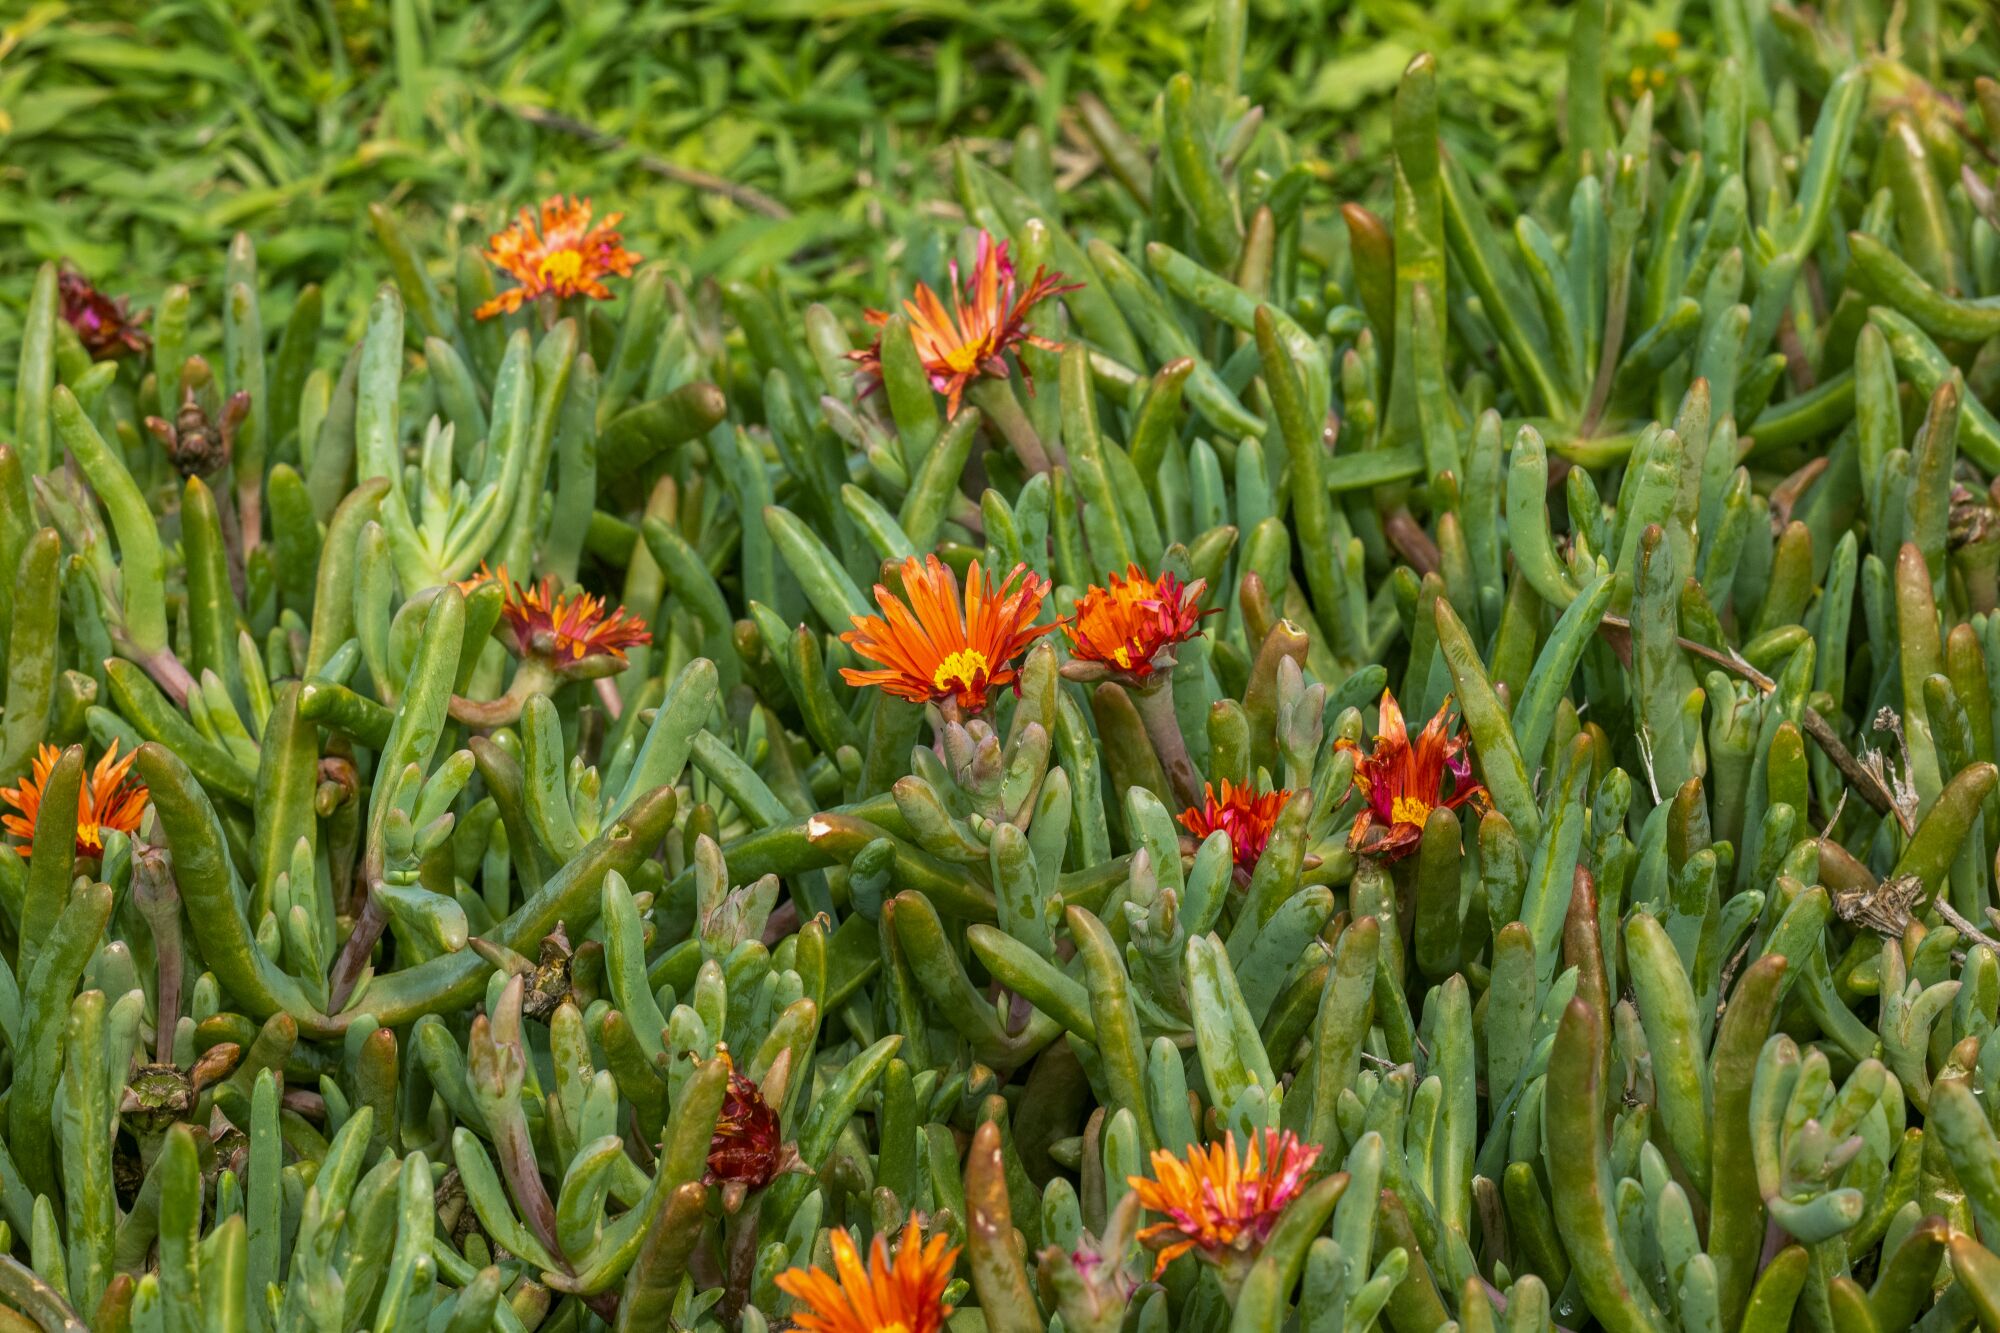 The invasive red-flowered iceplant.